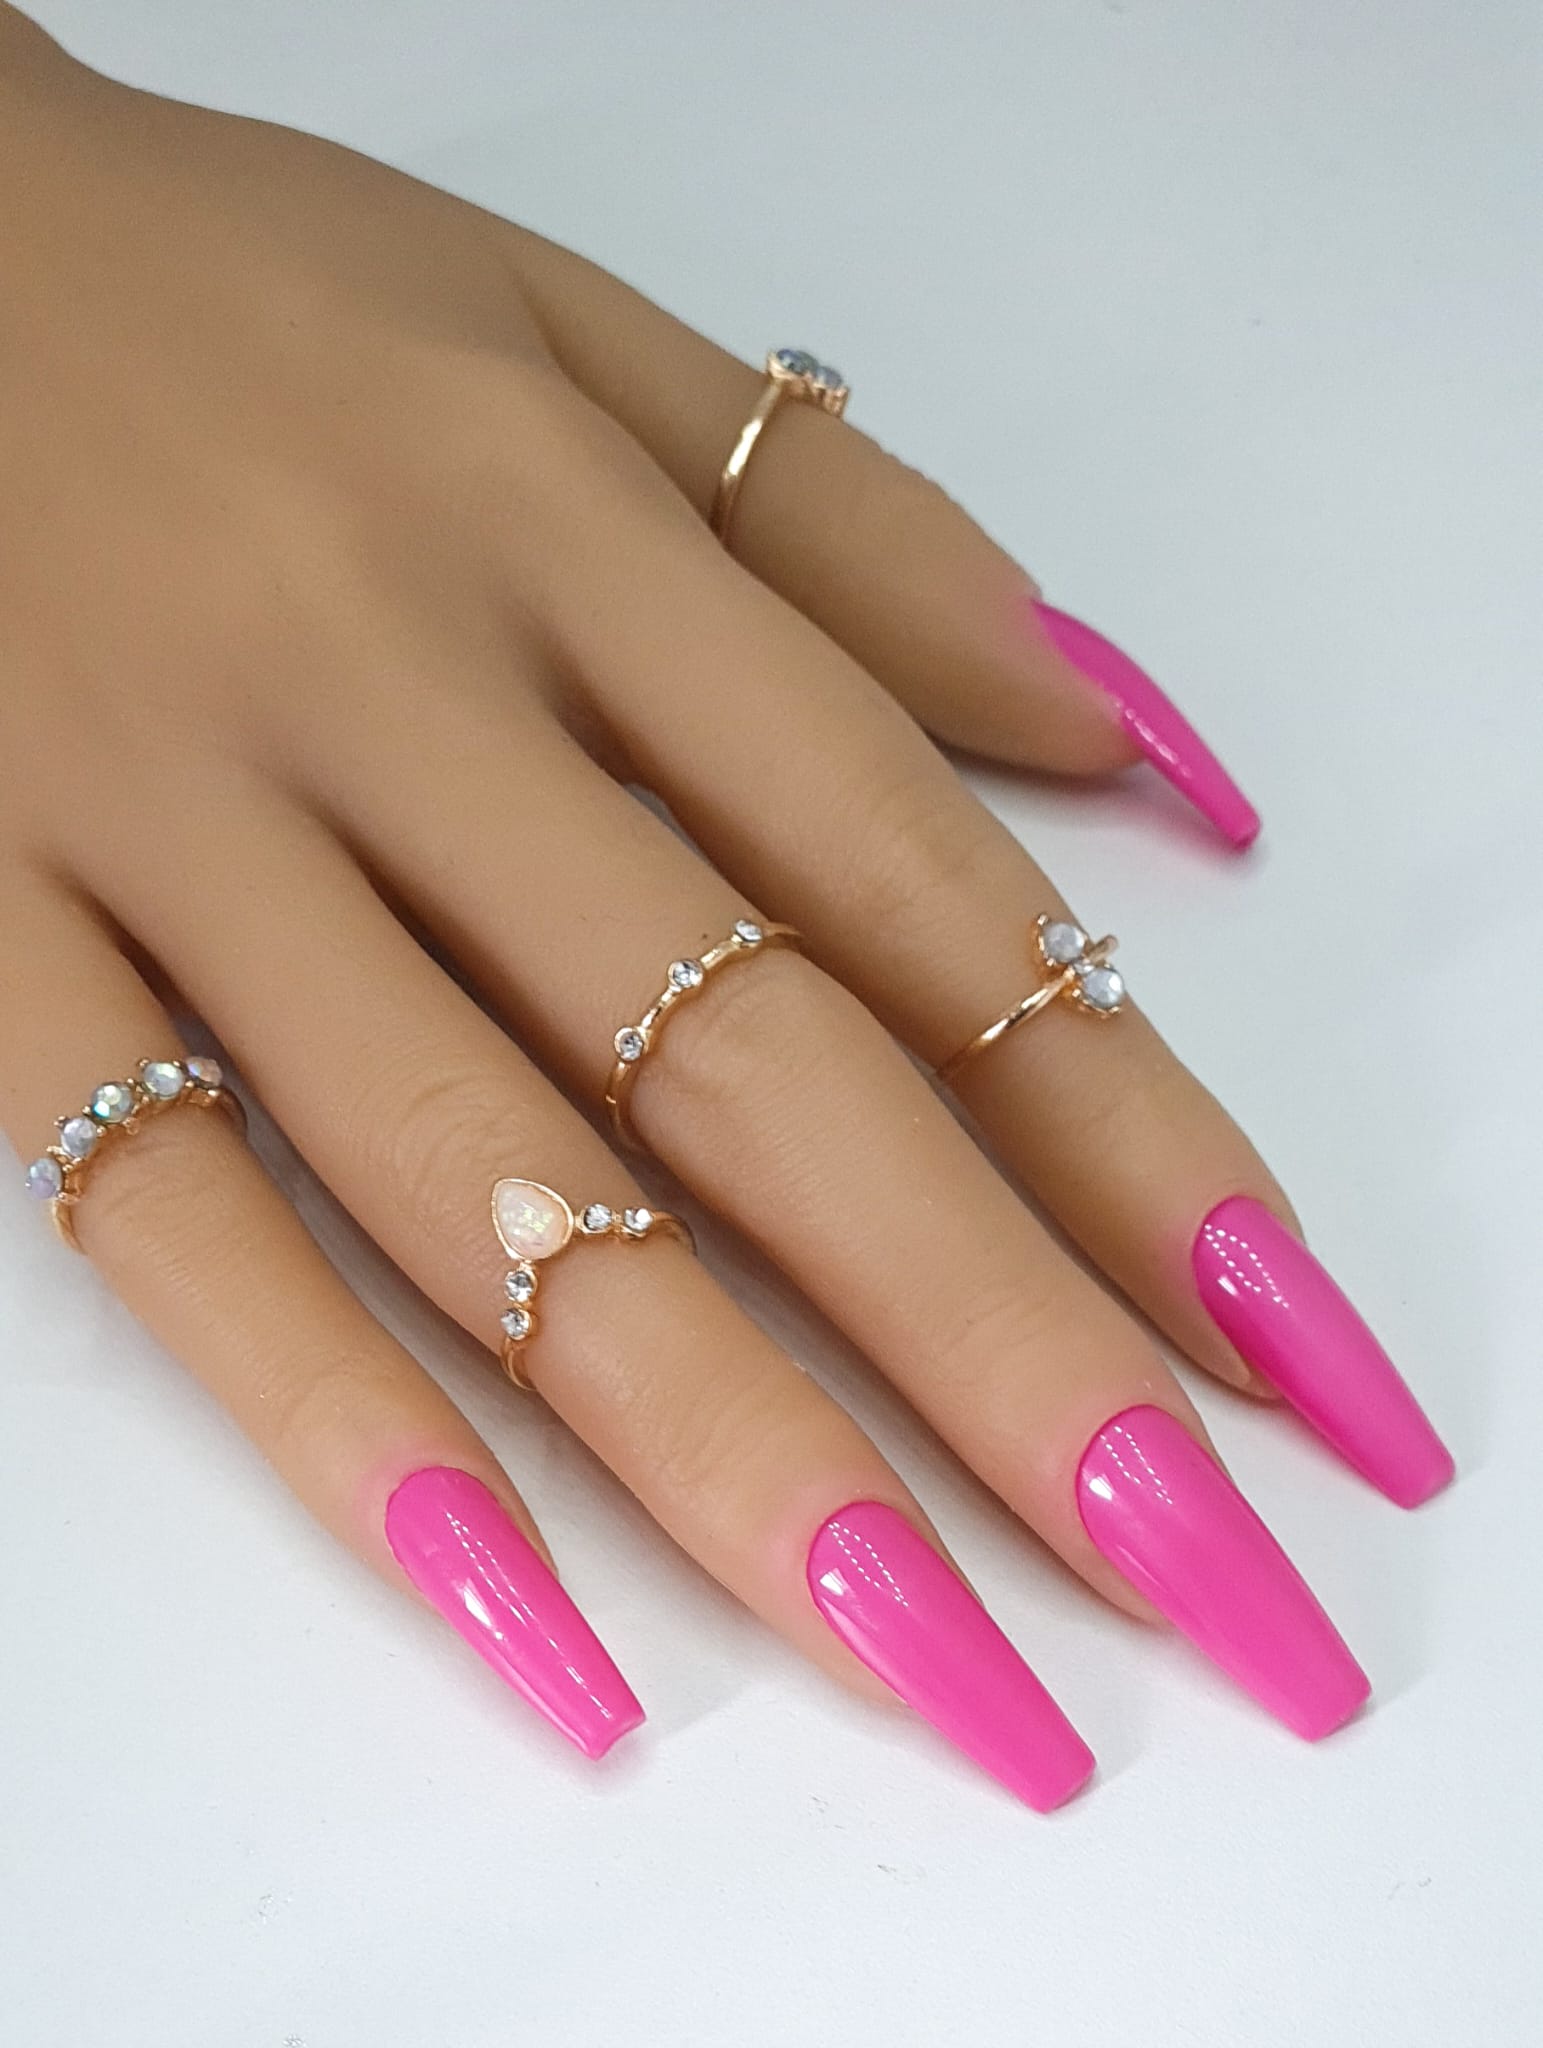 False Nails in coffin nails shape in a rose hot pink base colour